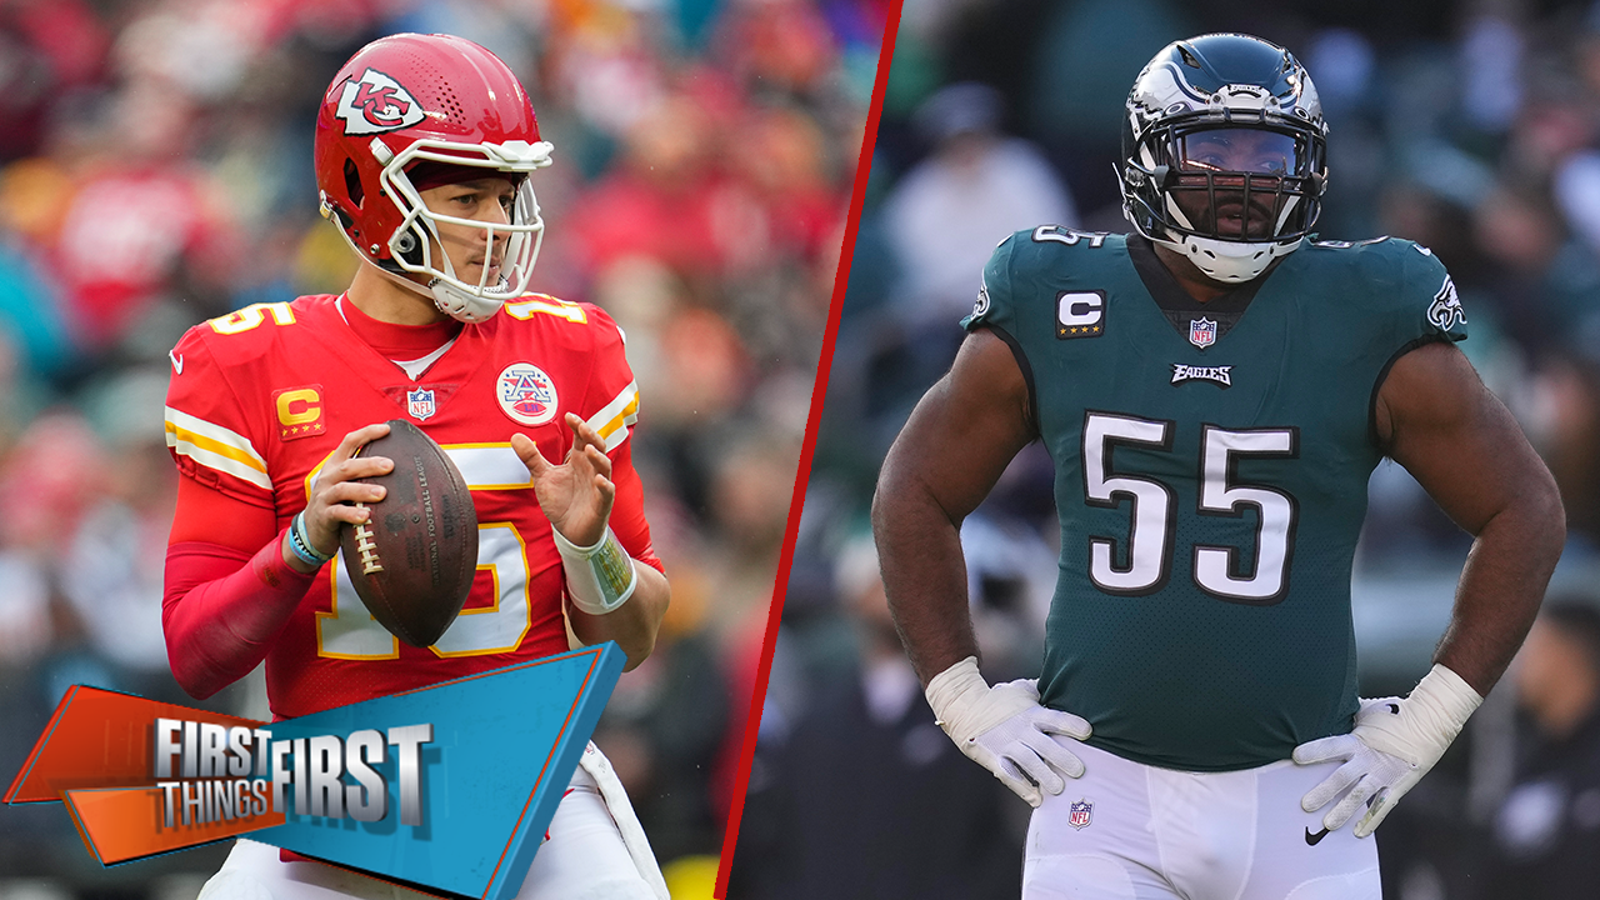 Brandon Graham on facing Patrick Mahomes: "You can't play scared"